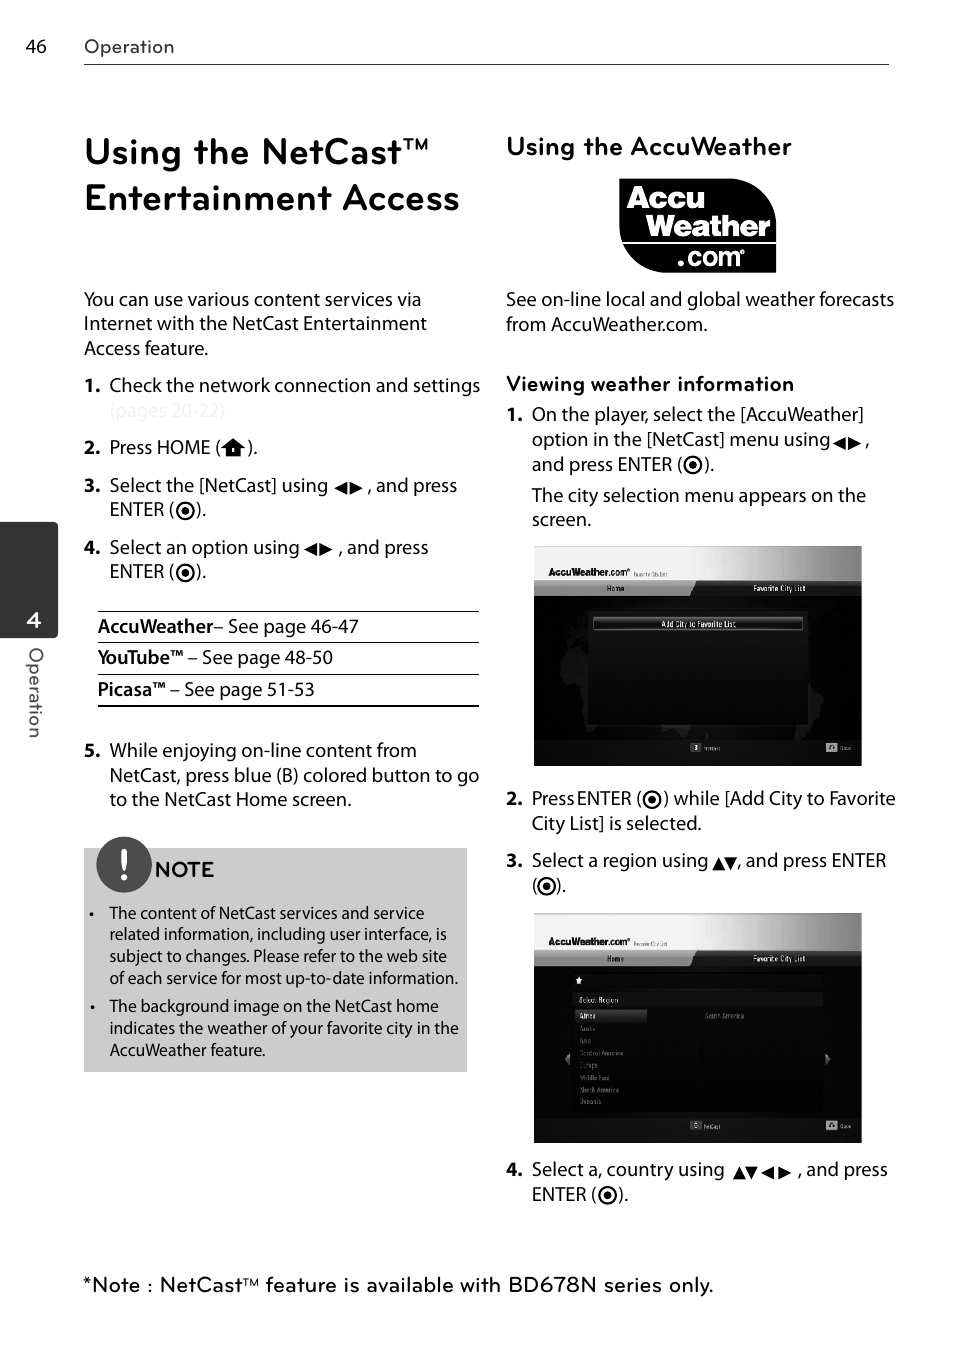 Using the netcast™ entertainment access, Using the accuweather | LG BD678N User Manual | Page 46 / 72